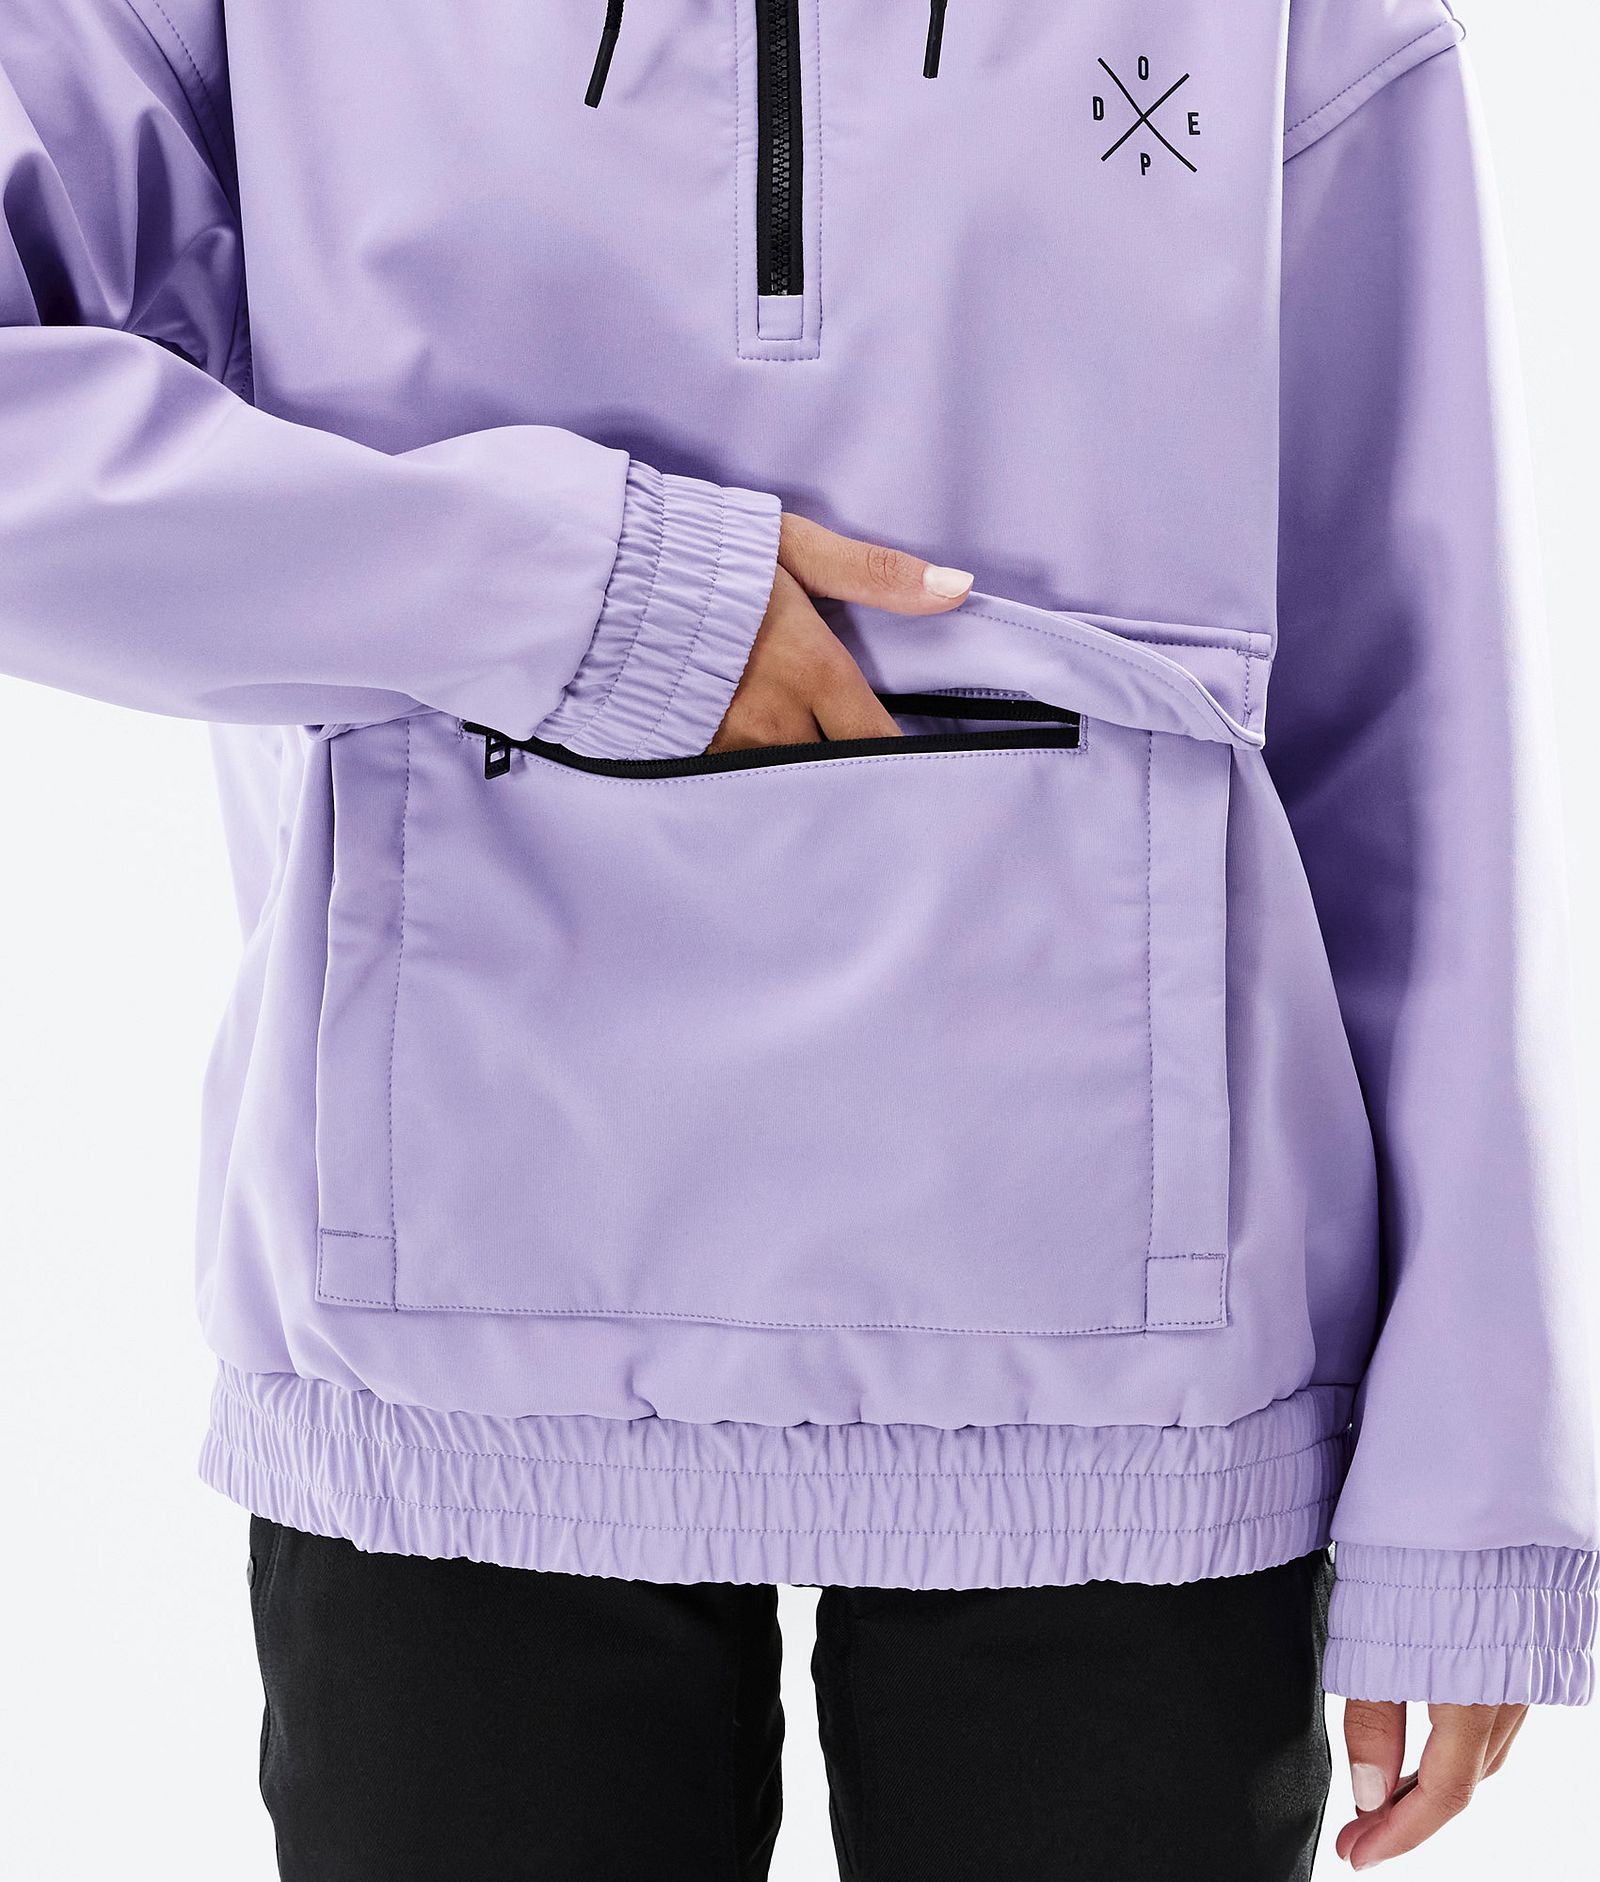 Dope Cyclone W 2022 Veste Snowboard Femme Faded Violet